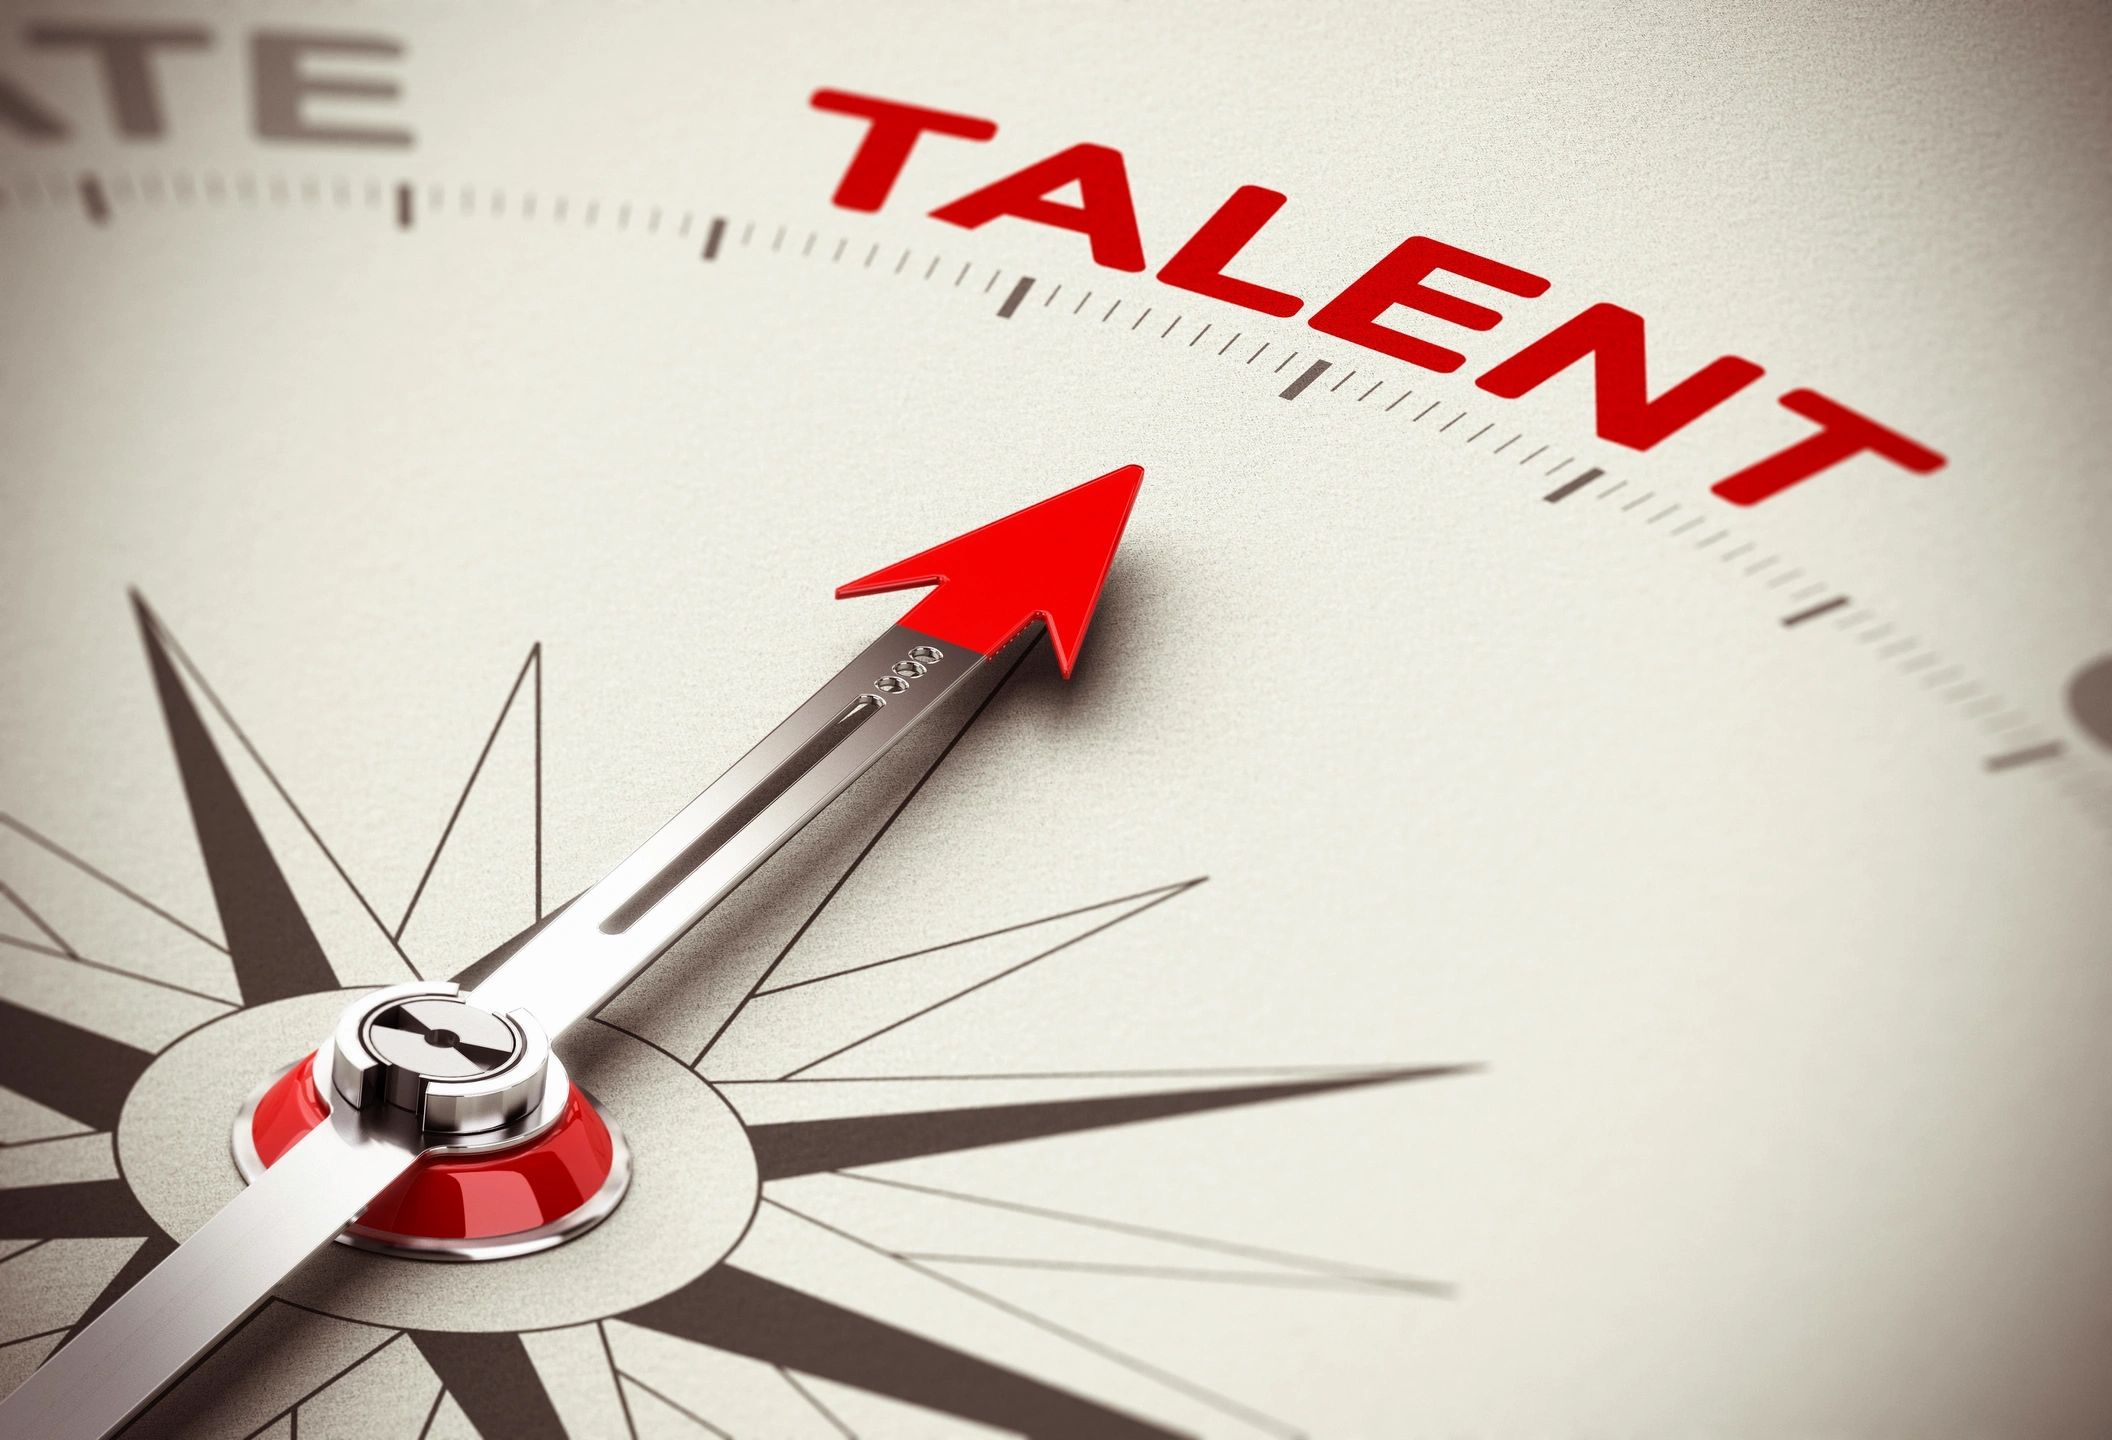 Small Business, Big Talent: 5 Key Ways to Attract Qualified Candidates.